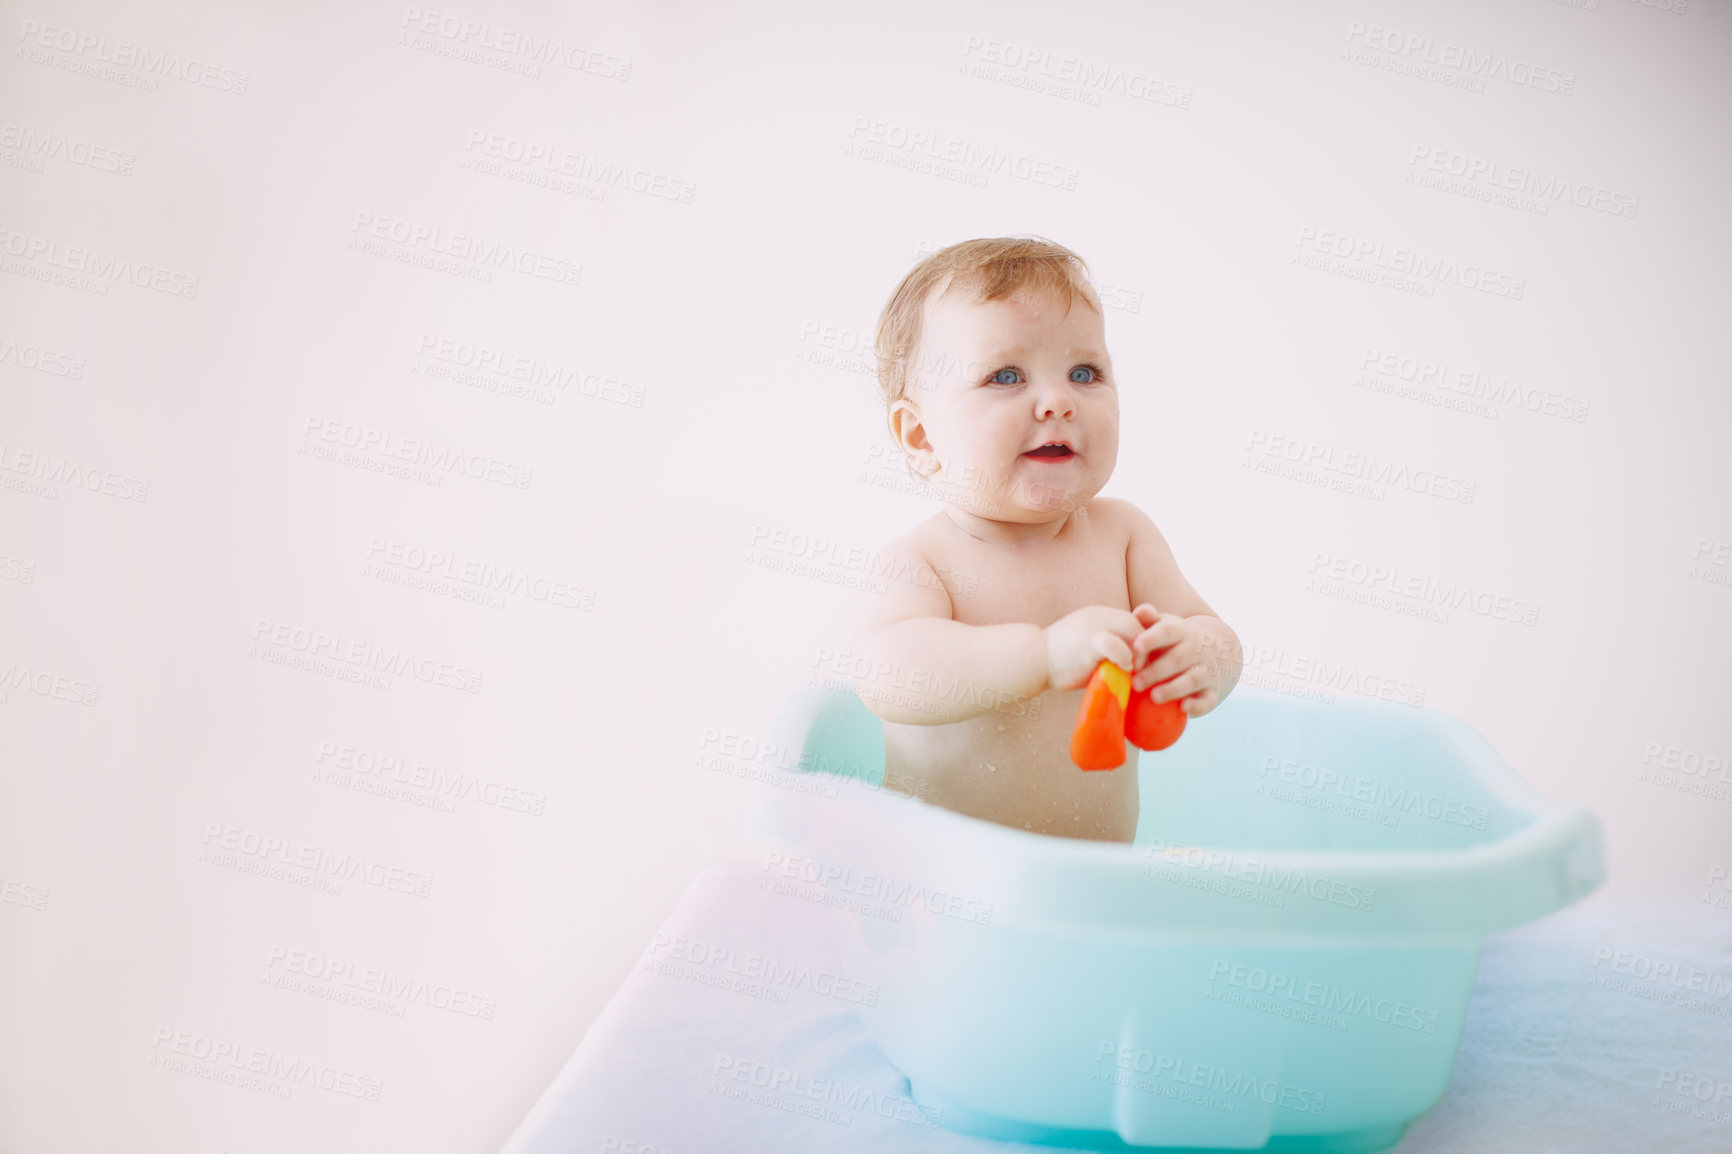 Buy stock photo Shot of a baby girl playing with a toy in the bathtub